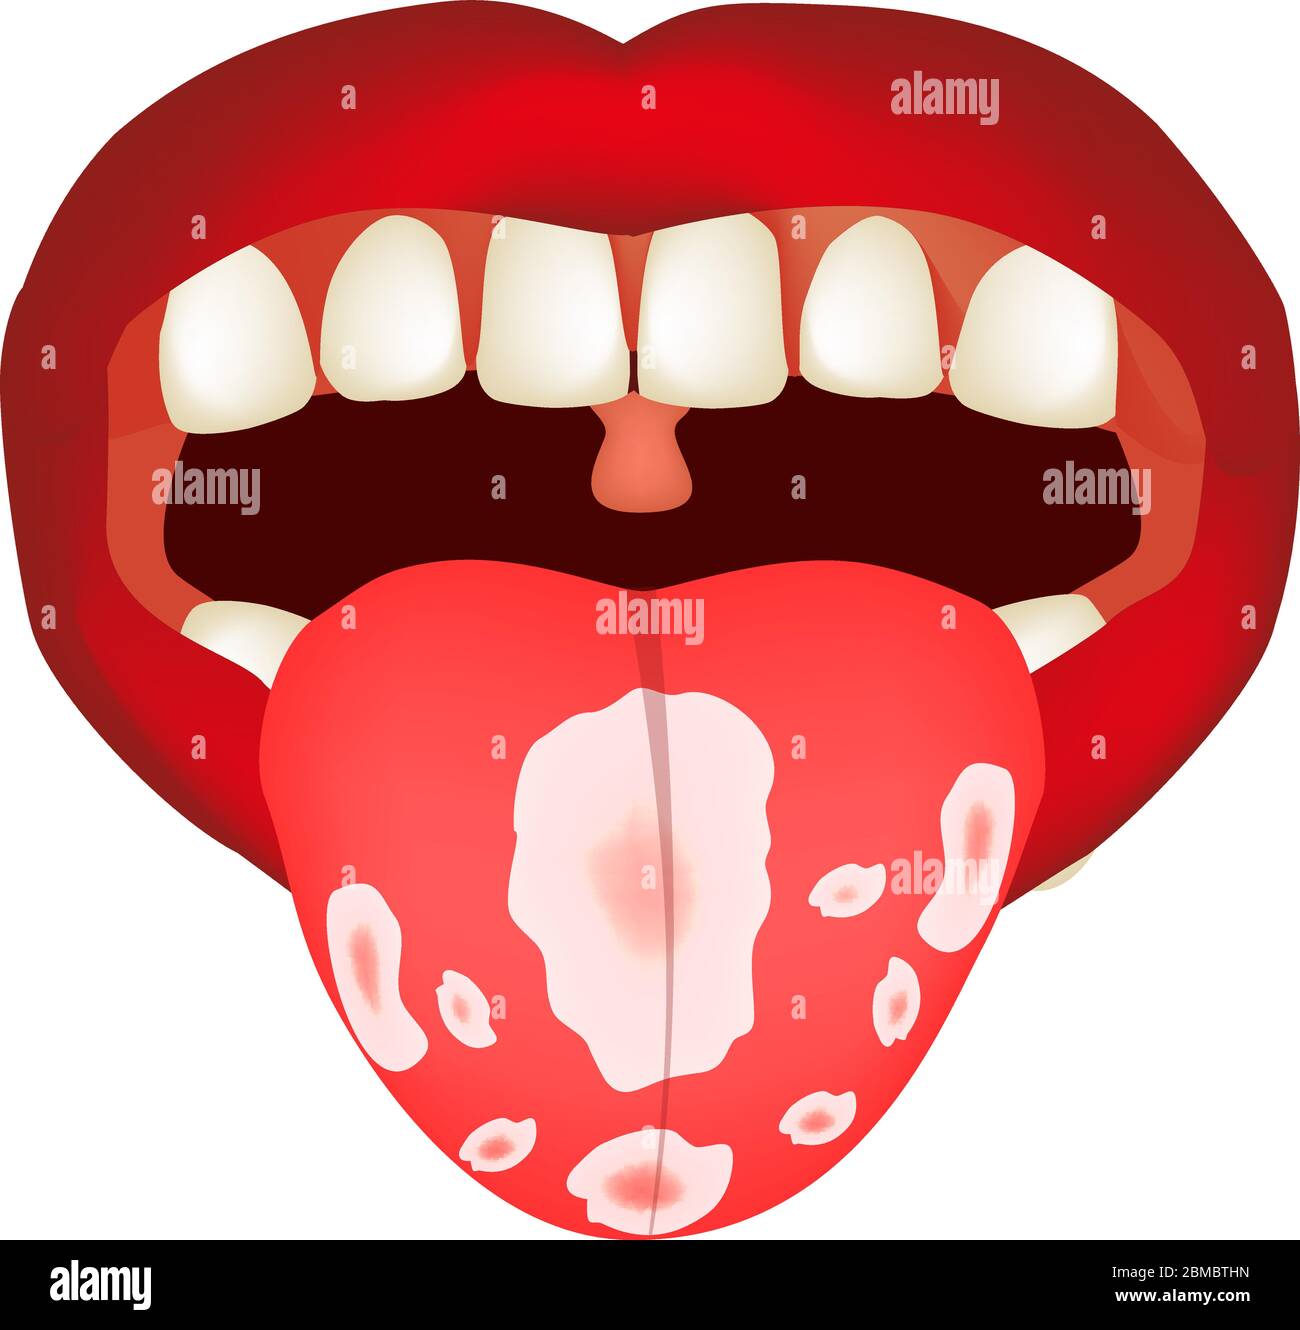 Oral thrush. Candidiasis on the tongue. Fungus in the mouth. Infographics. Vector illustration on isolated background. Stock Vector